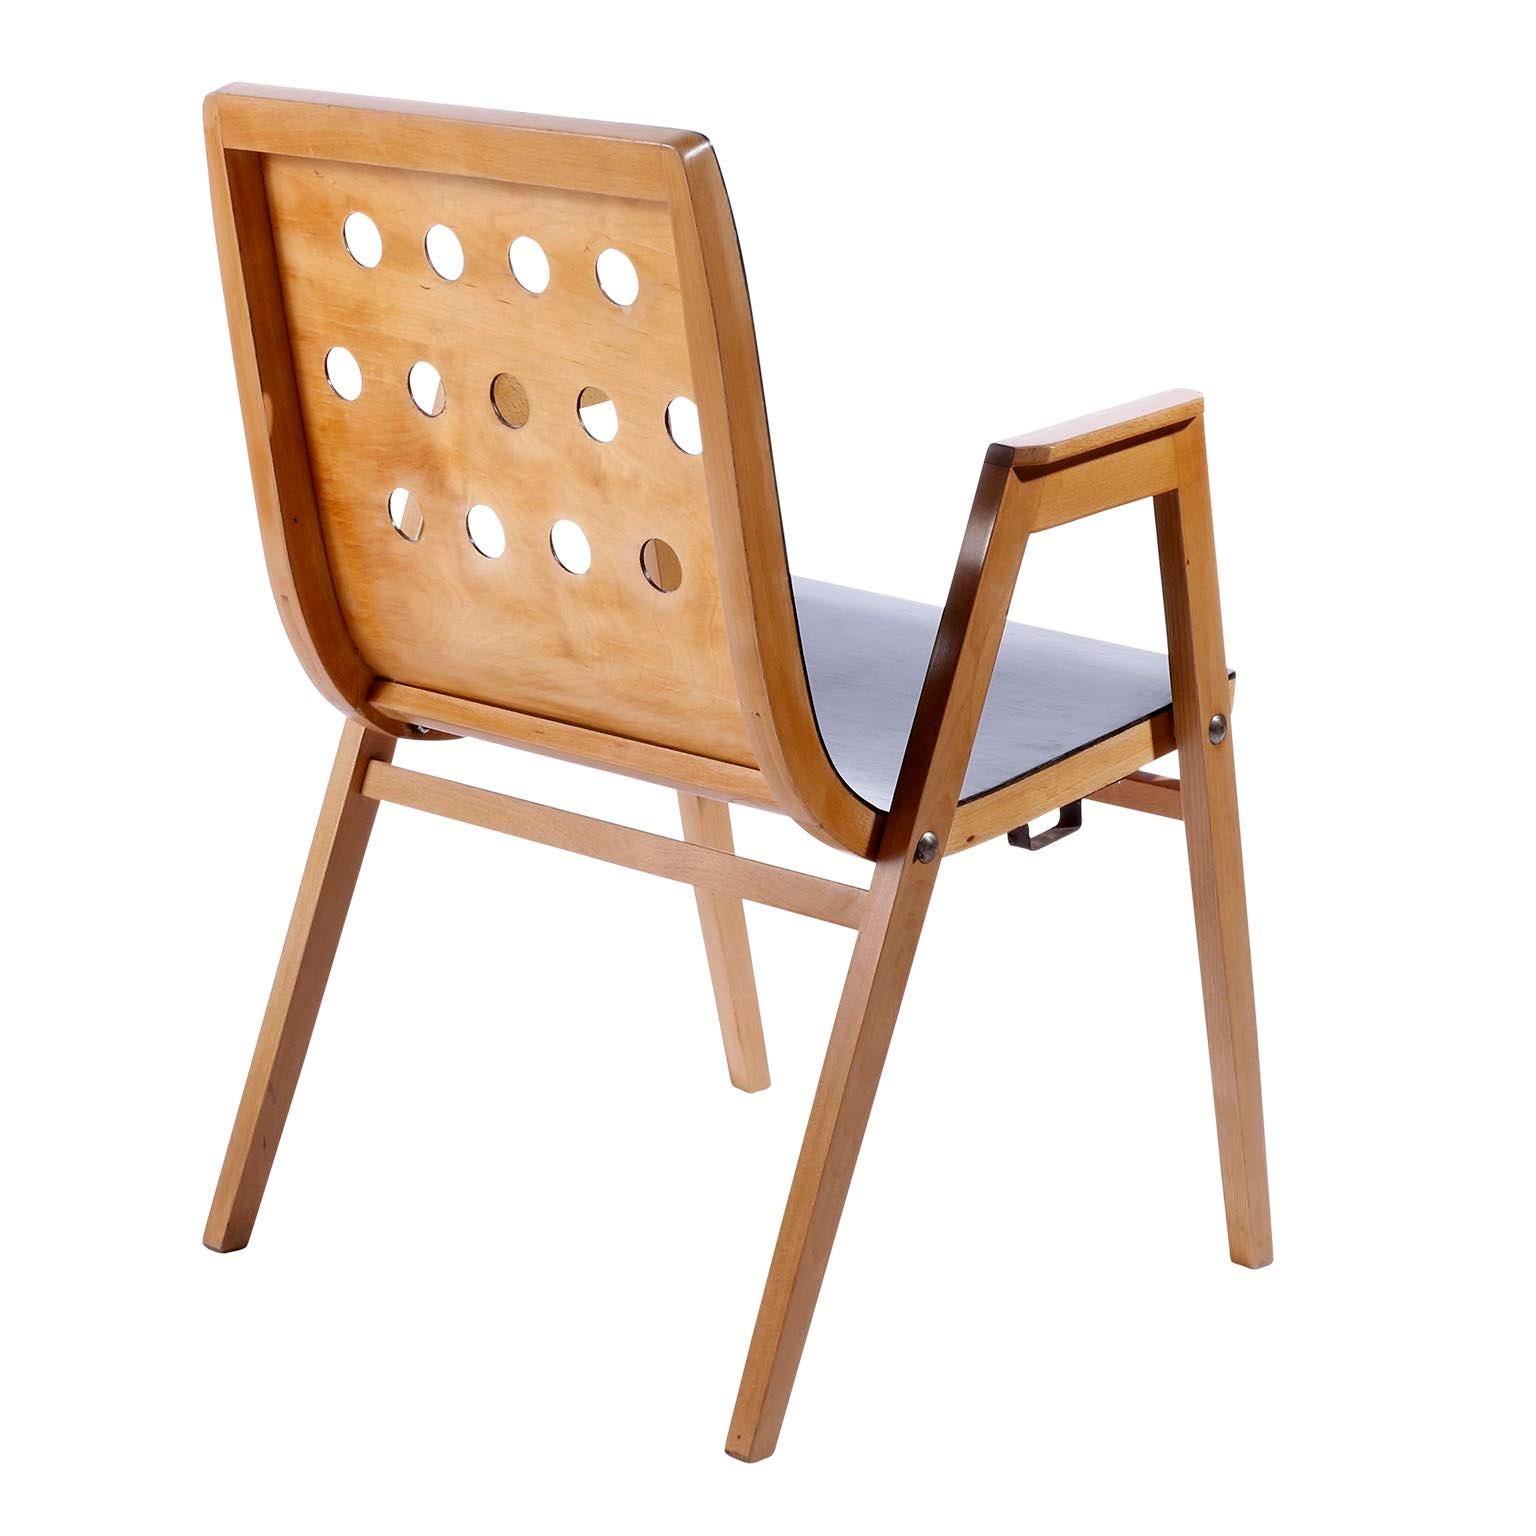 Mid-20th Century Roland Rainer Armchair Stacking Chair, Bicolored Beech Wood, Austria, 1951